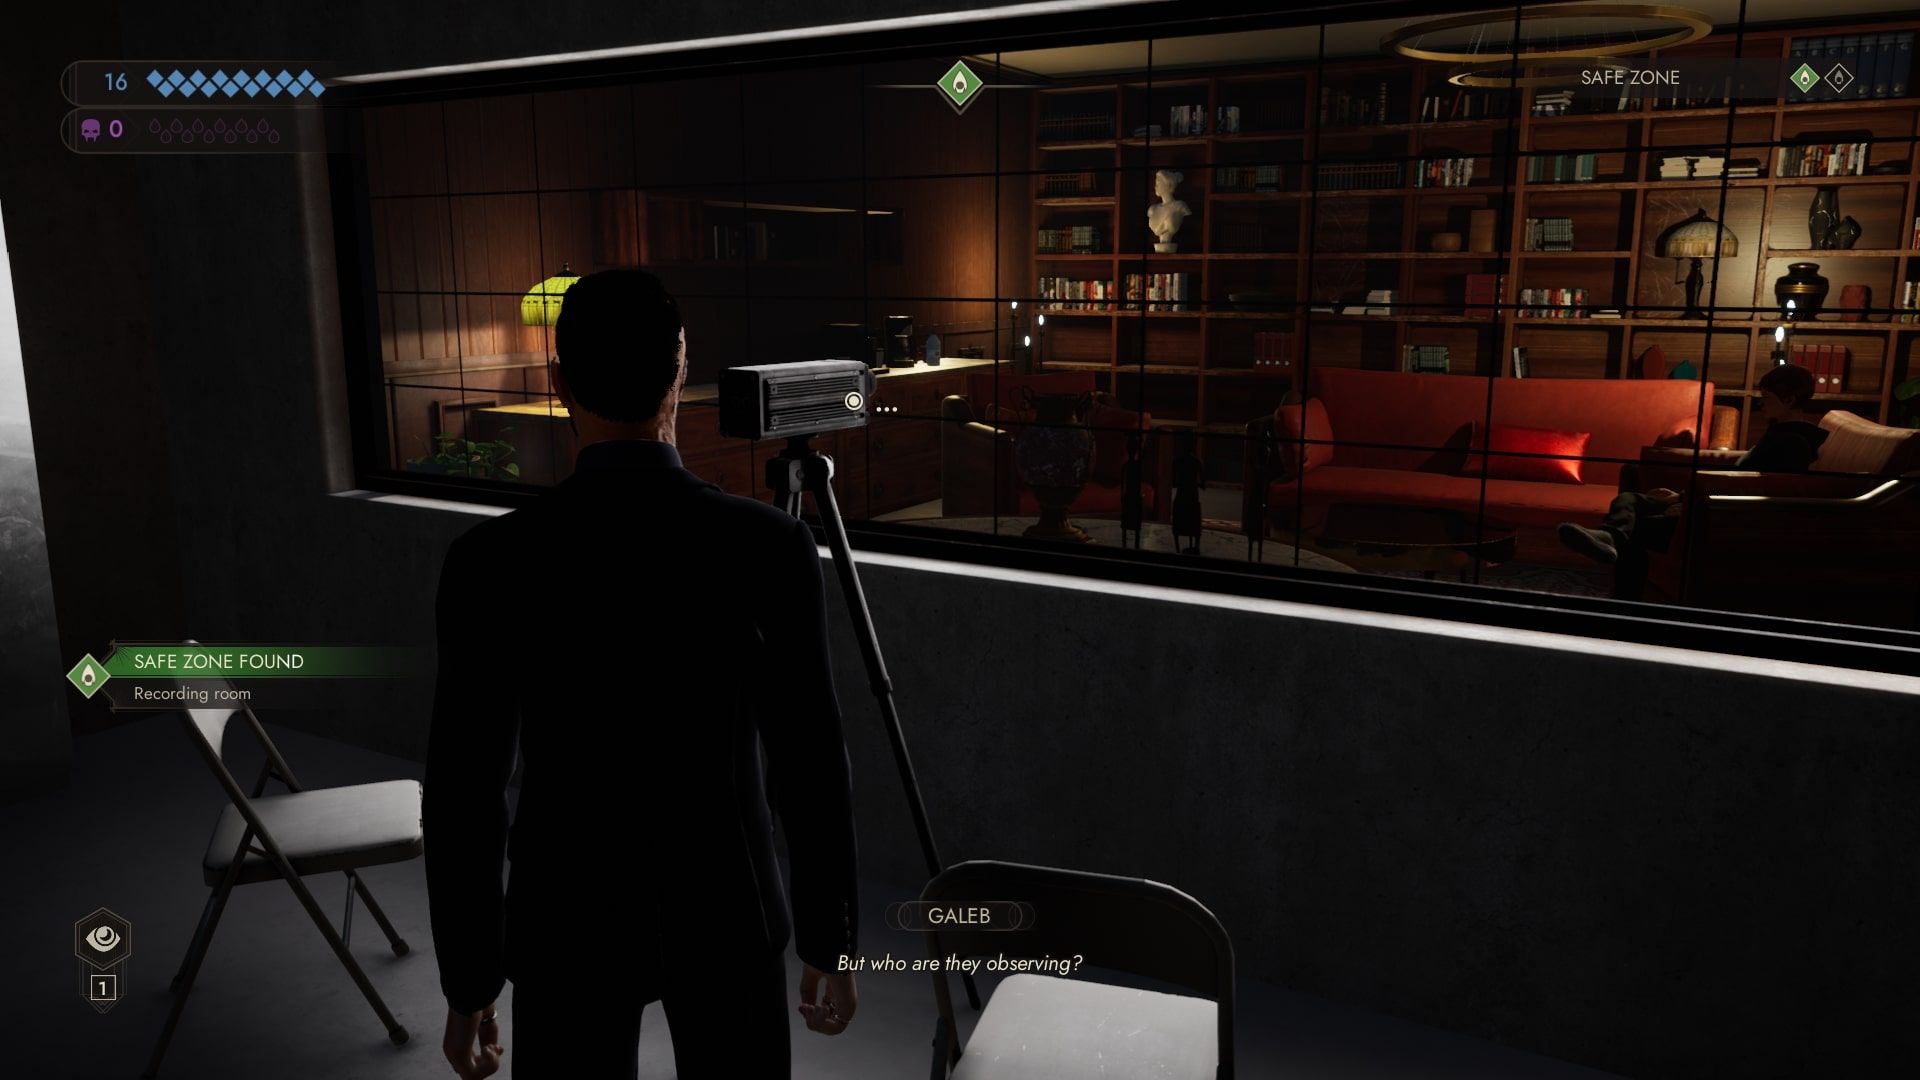 Vampire: The Masquerade - Swansong Galeb retrieving red sd card from camera in observation room